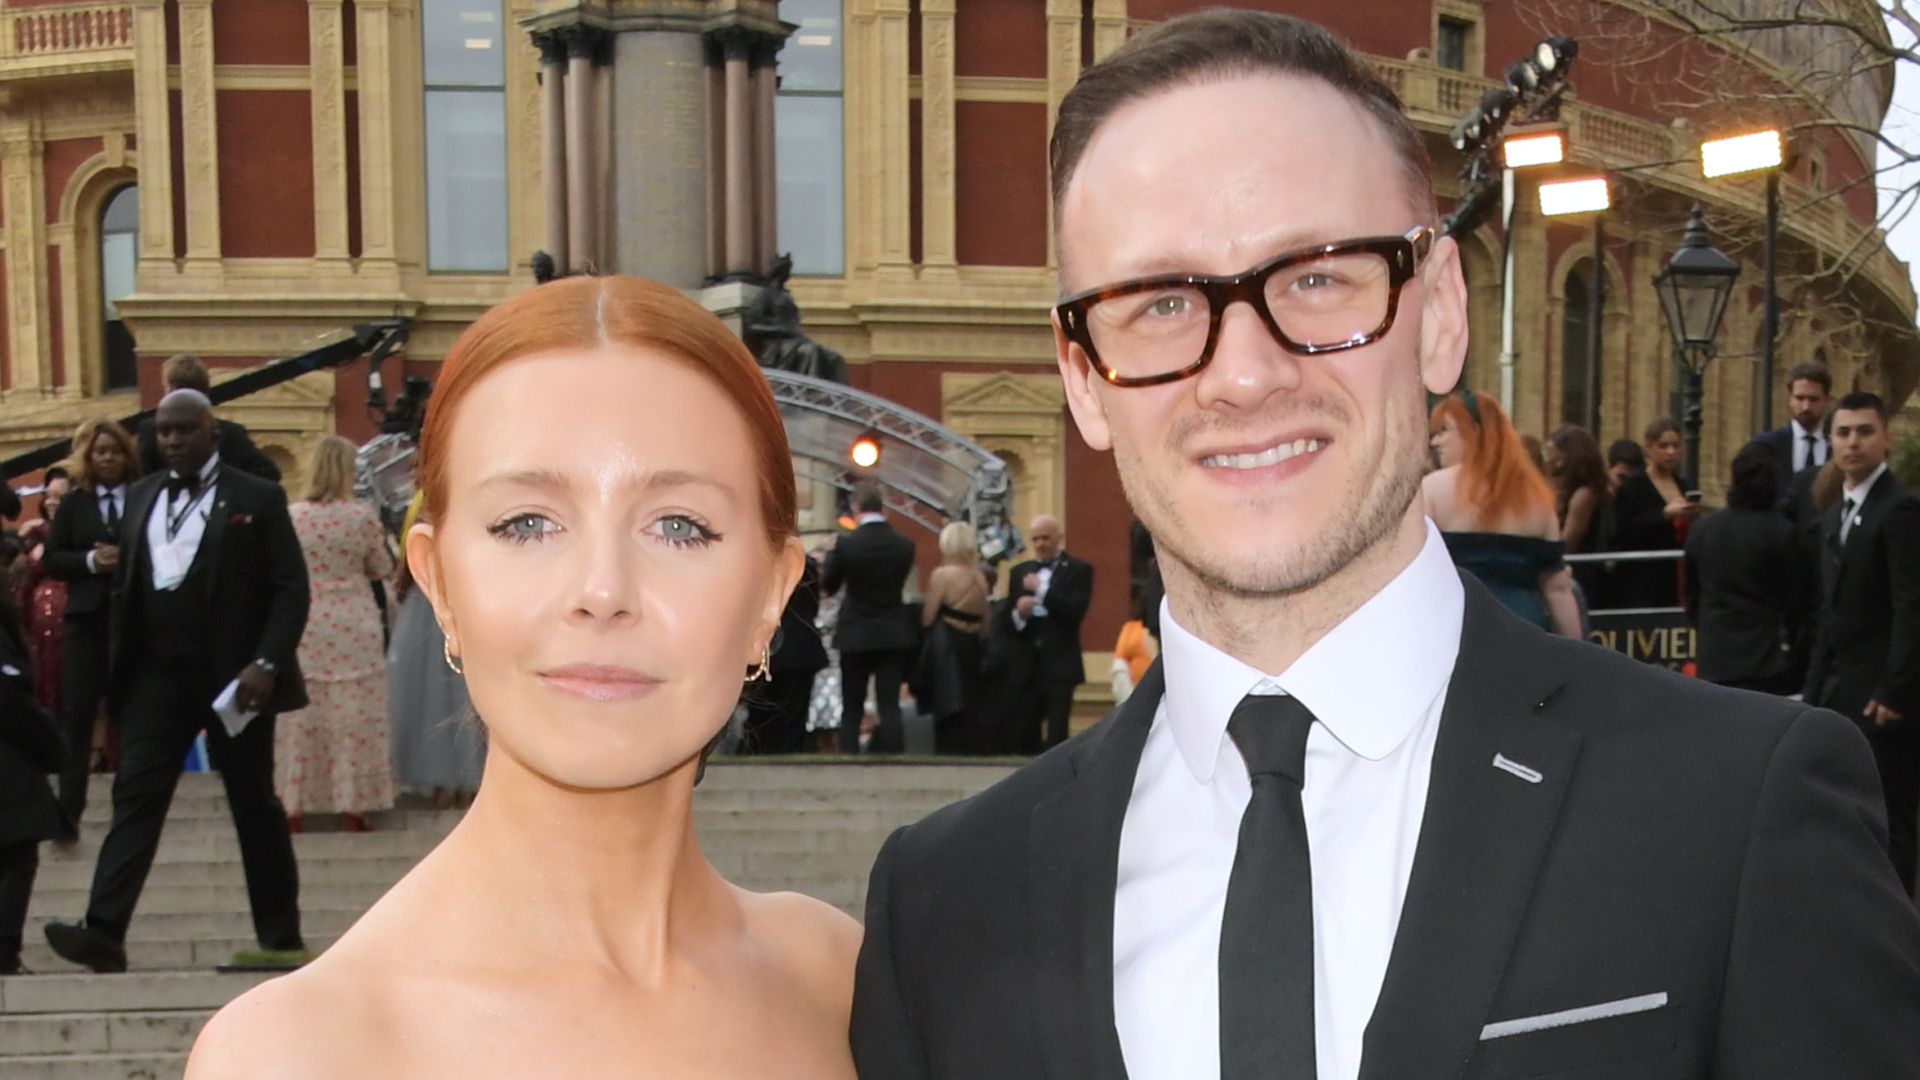 Stacey Dooley in black dress stood with Kevin Clifton in a suit